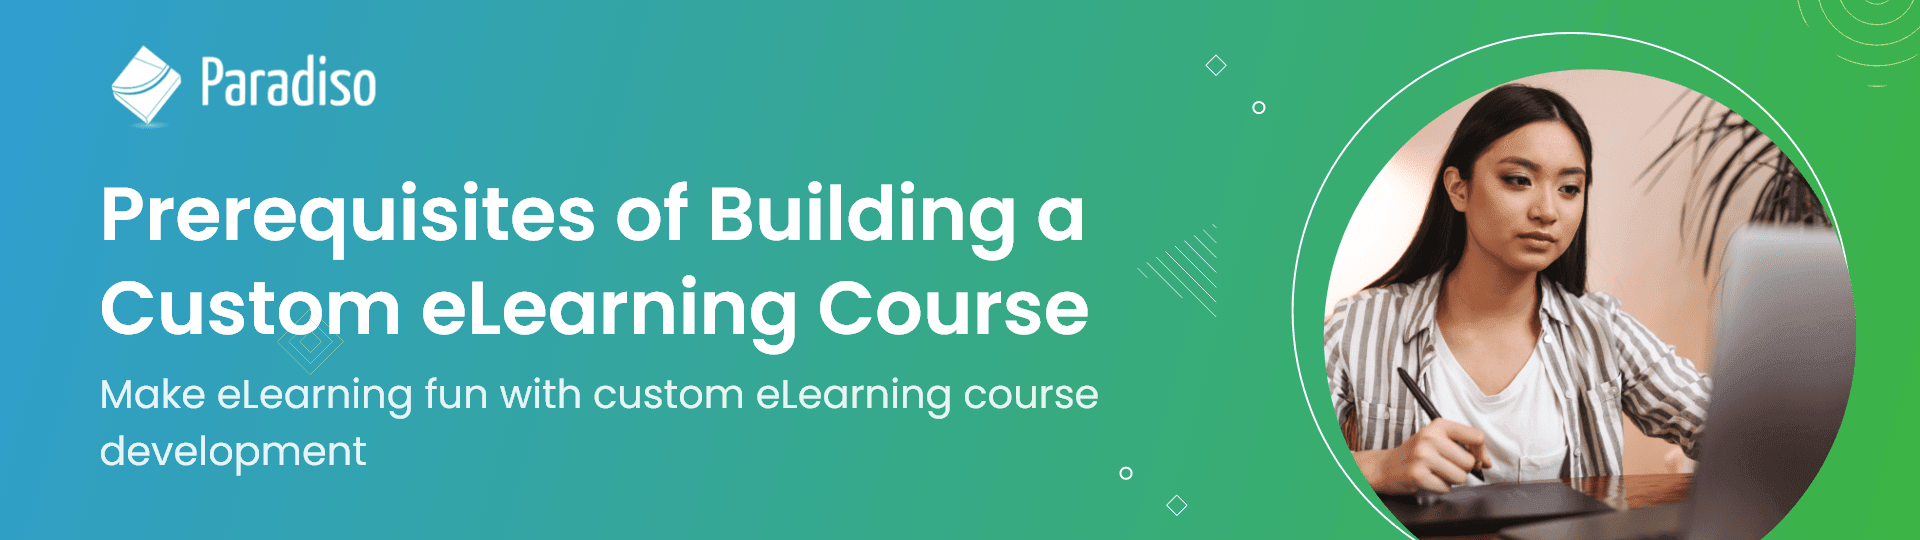 Prerequisites of Building a Custom eLearning Course